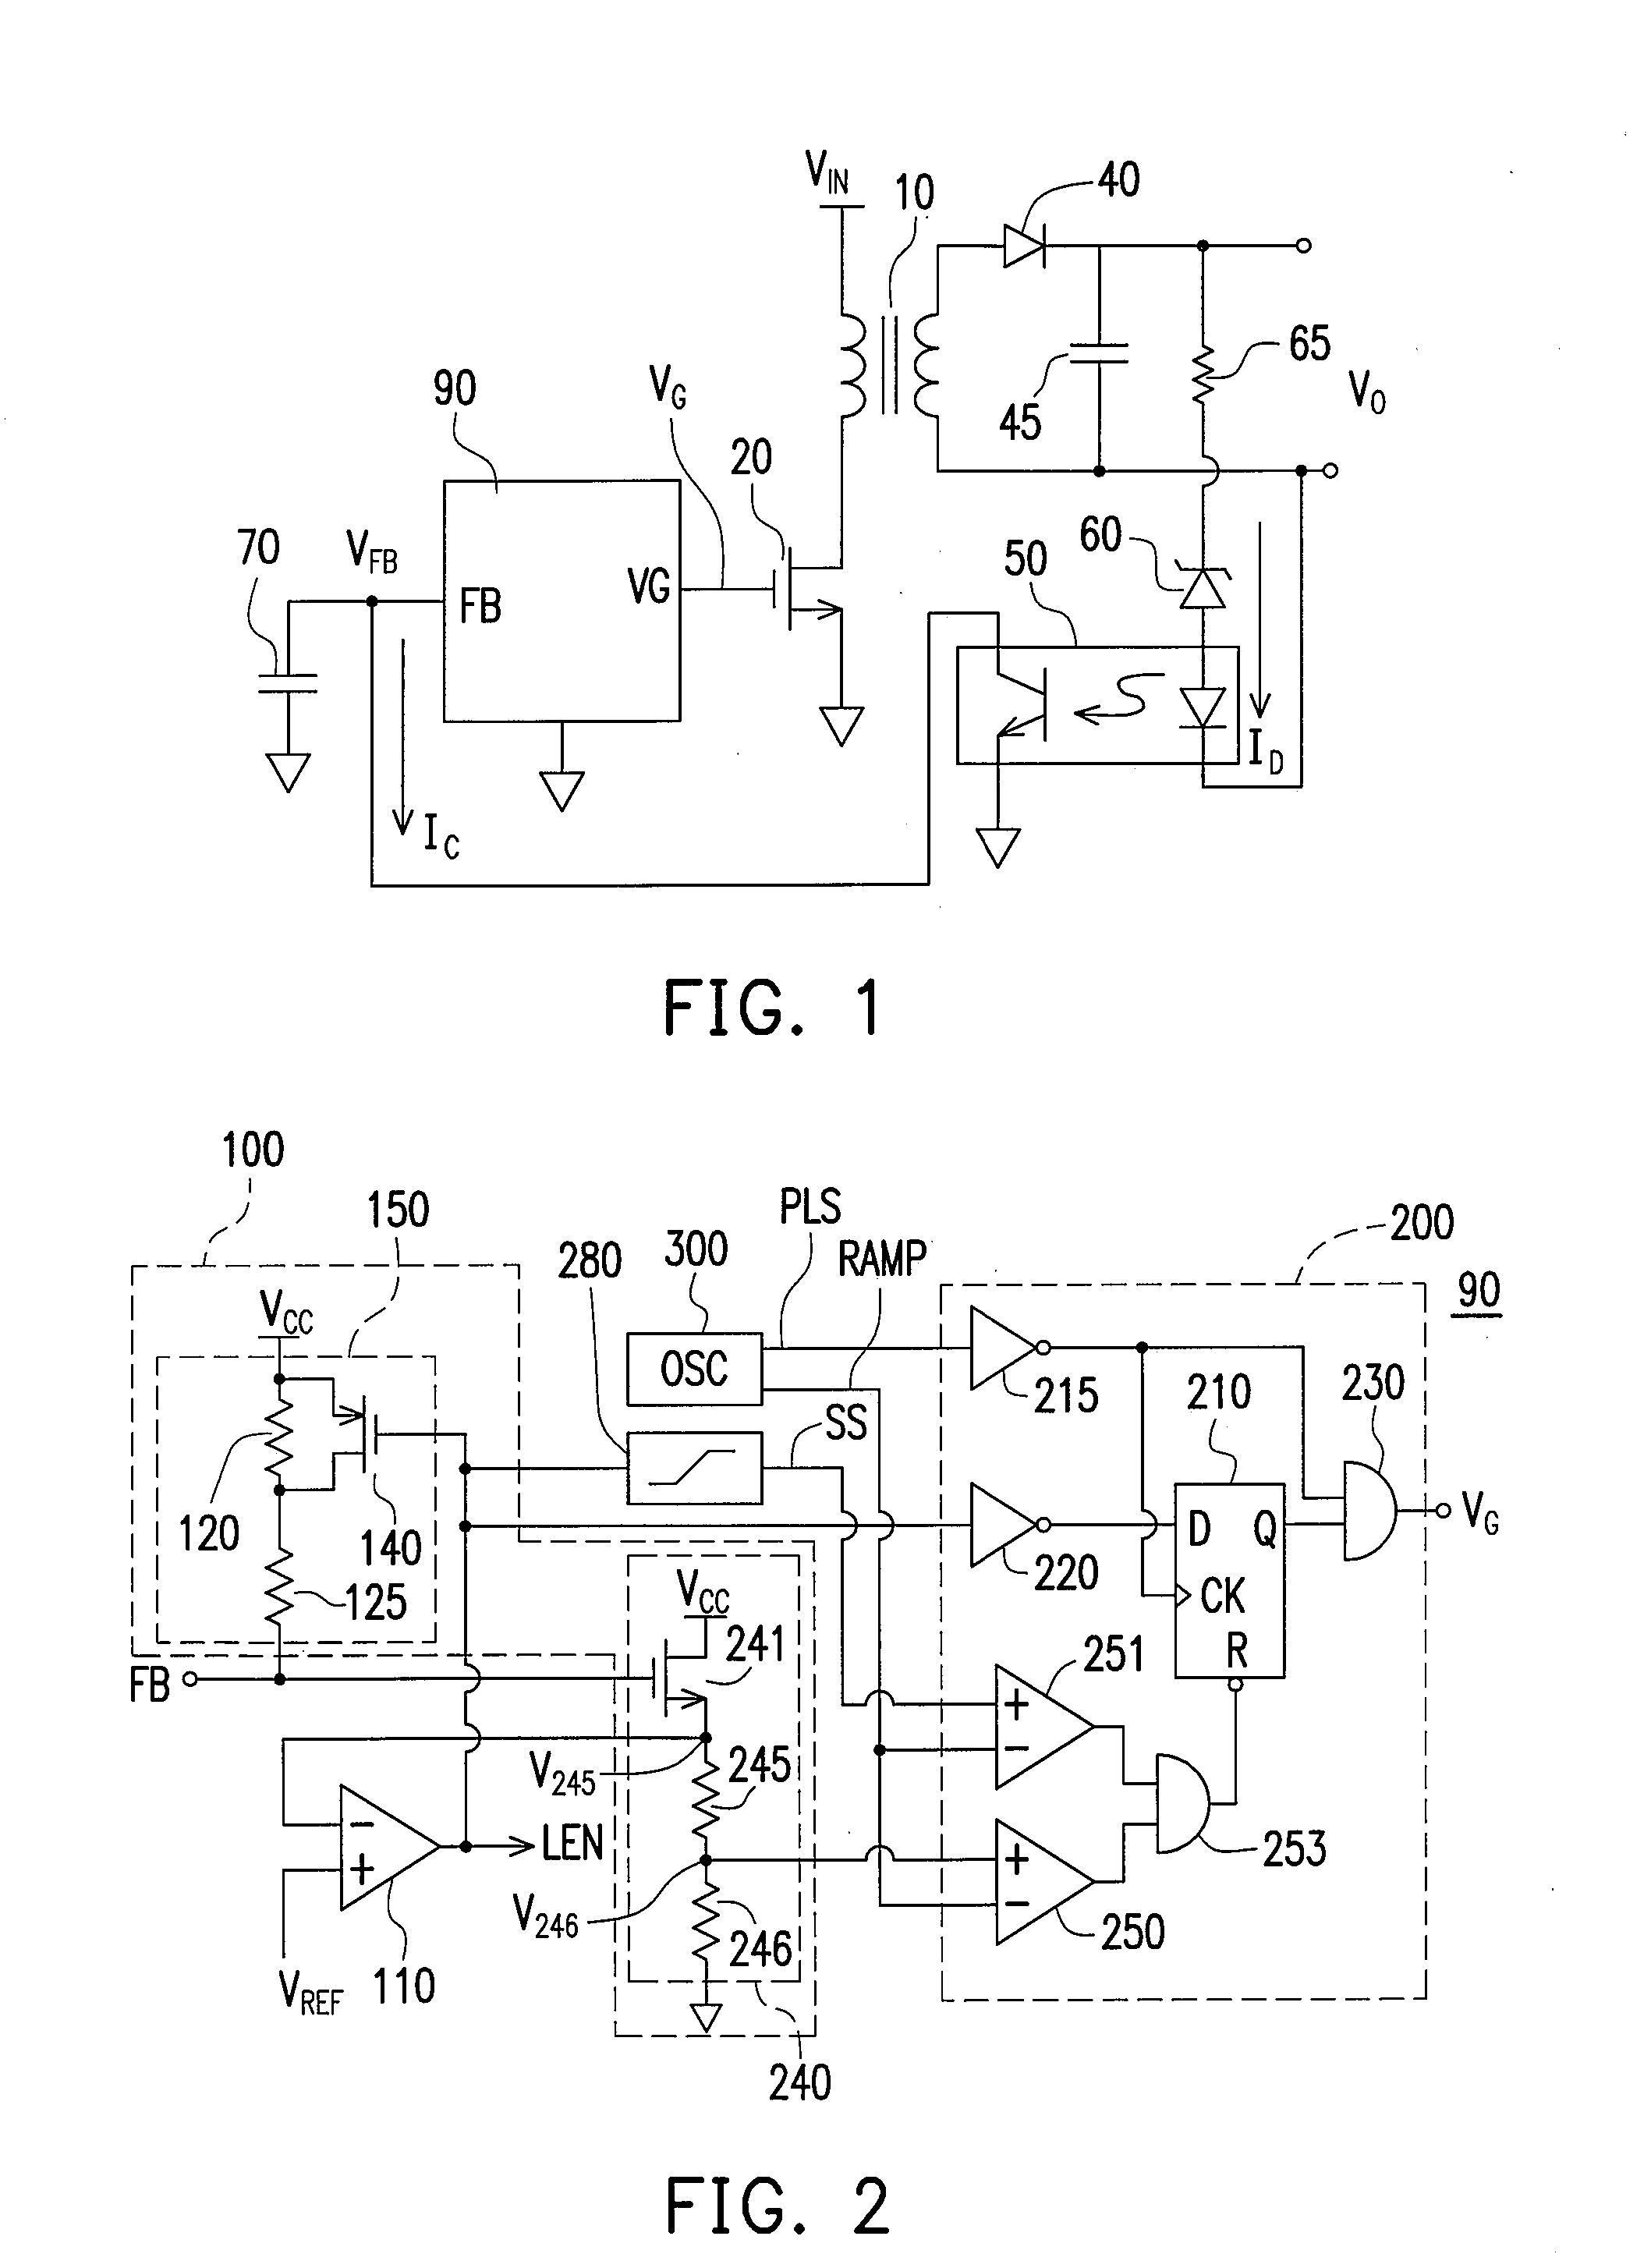 Controller with loop impedance modulation for power converter